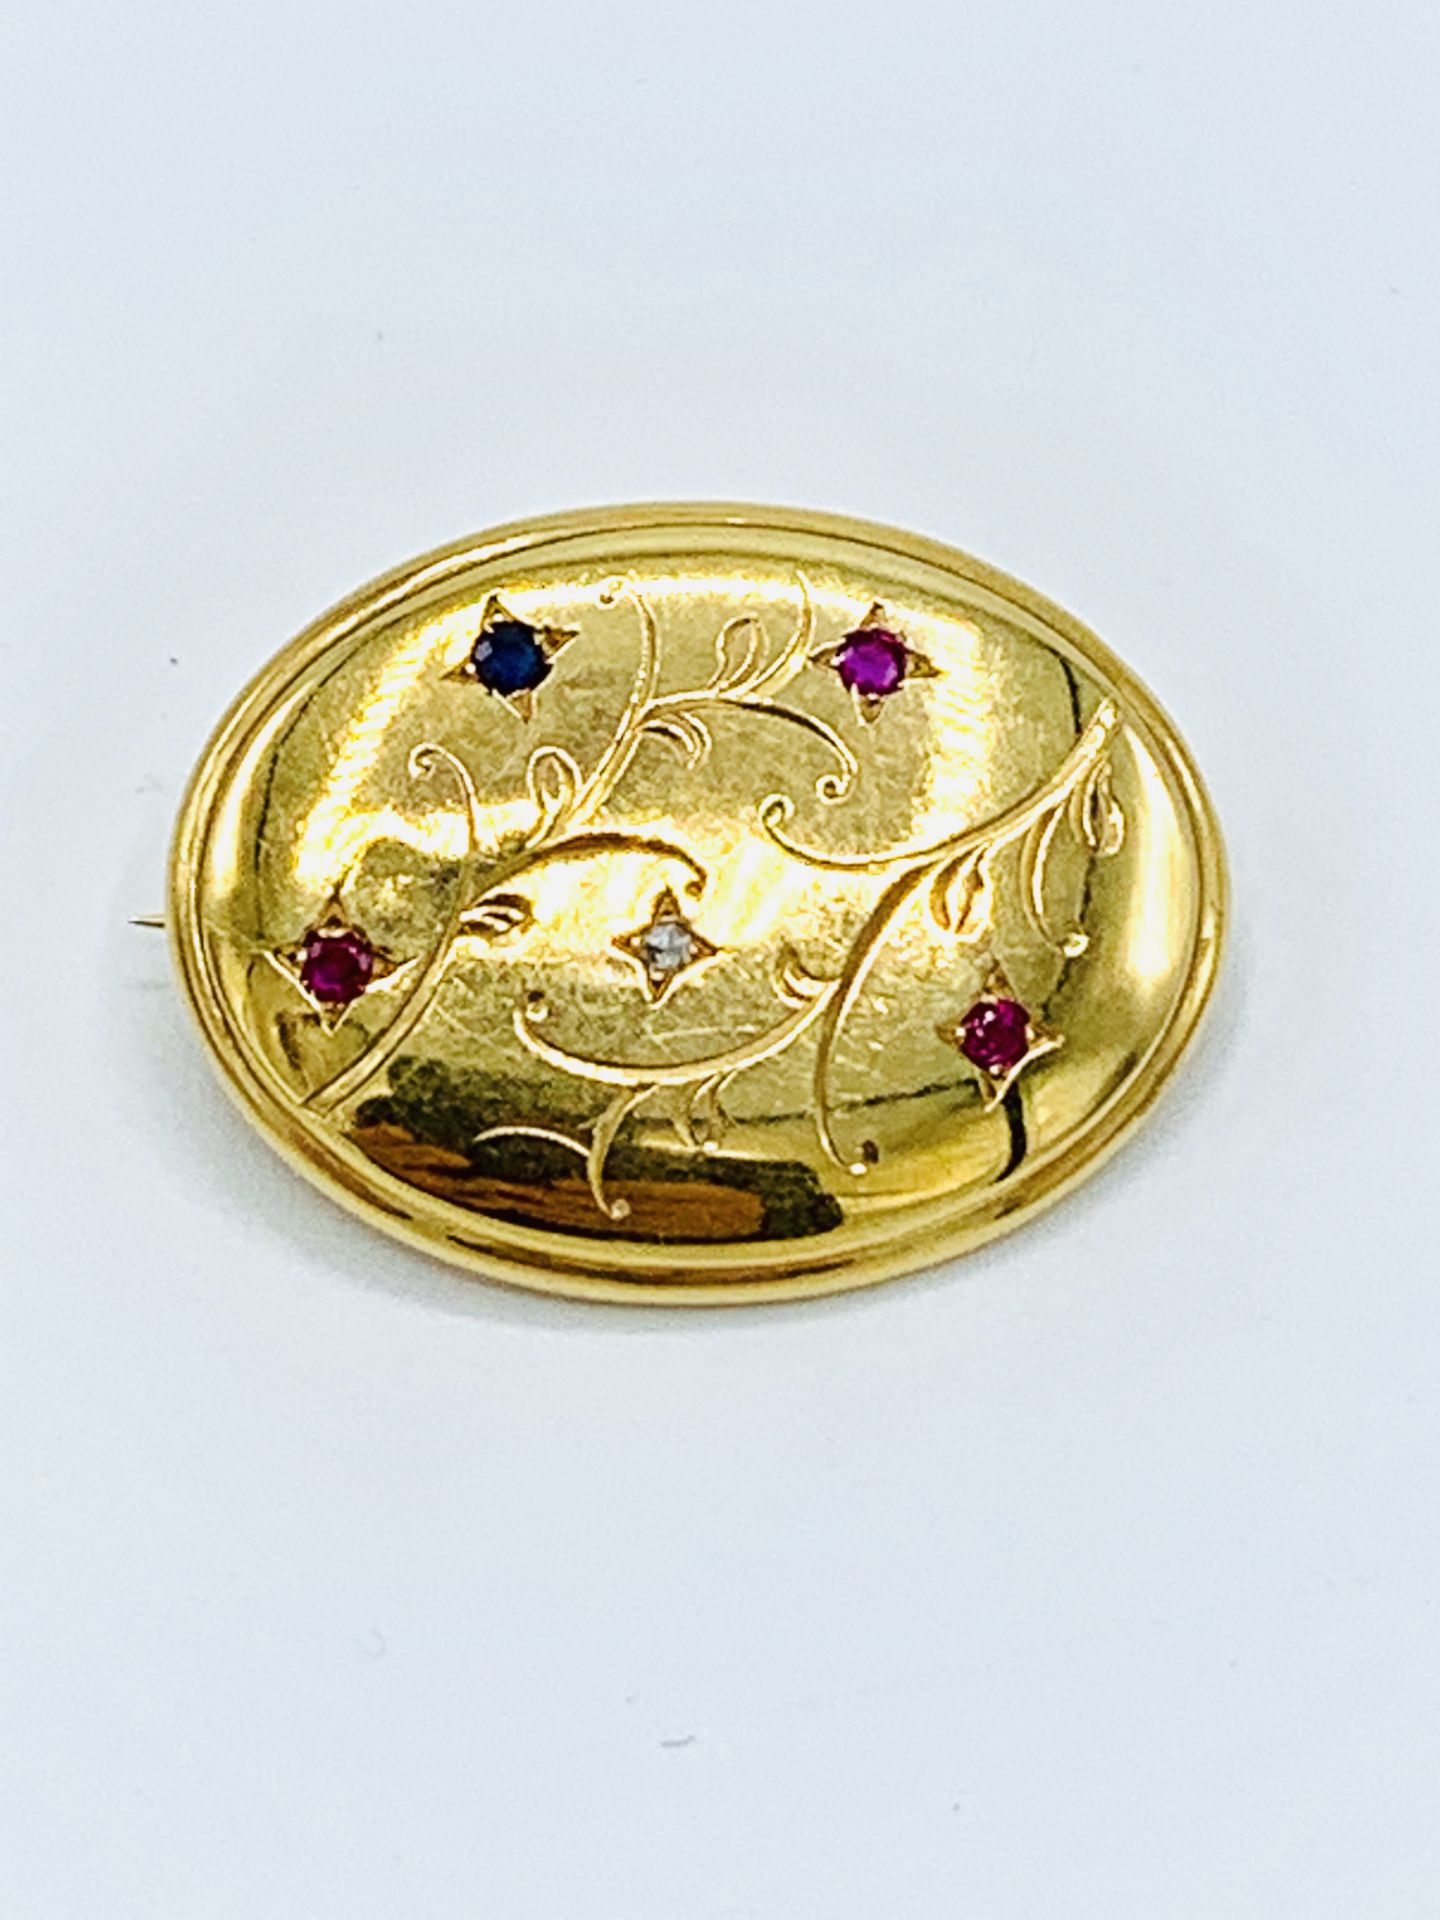 18k gold oval brooch decorated with red, blue and white stones. - Image 5 of 5